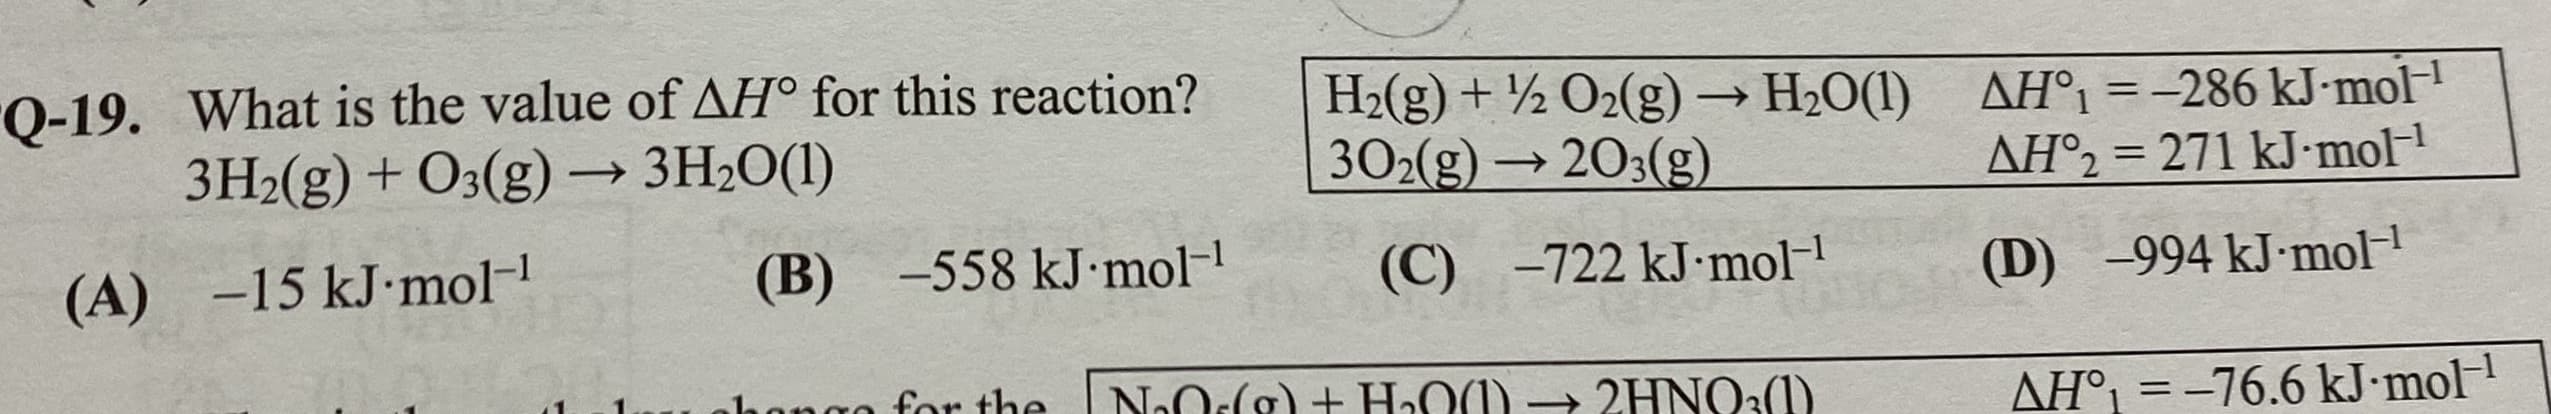 Q-19. What is the value of AH° for this reaction?
3H2(g) + O3(g) – 3H2O(1)
H2(g) + ½ O2(g) → H2O(1)
302(g) → 203(g)
AH°1 = -286 kJ-mol
AH°2 = 271 kJ-mol
%3D
(B) -558 kJ•mol-
(A) -15 kJ•mol-
(C) -722 kJ·mol-
(D) -994 kJ-mol
NOlg)+ HOM) → 2HNO:)
for the
AH°1 = -76.6 kJ.mol1
